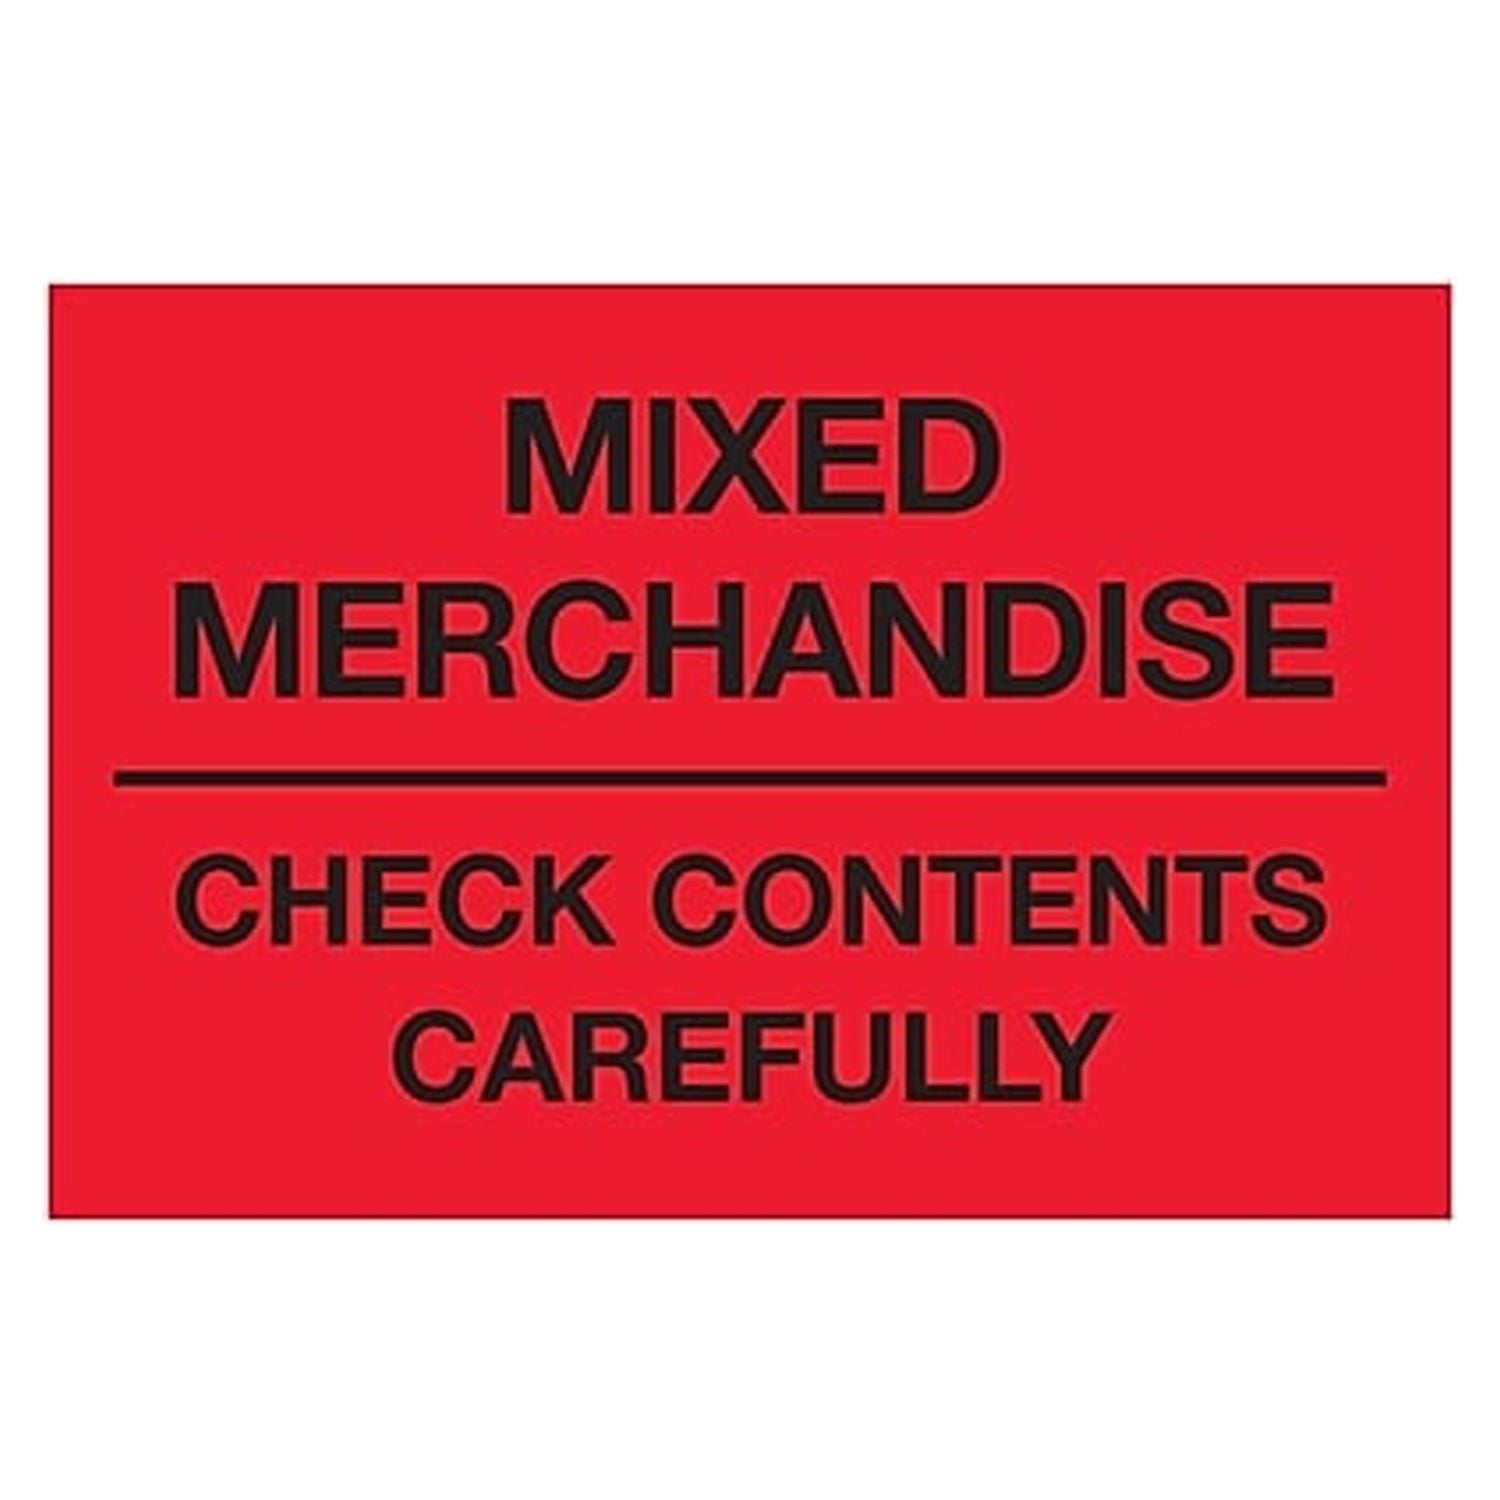 Dl1621 2 X 3 In. Mixed Merchandise Check Contents Carefully Labels, Fluorescent Red